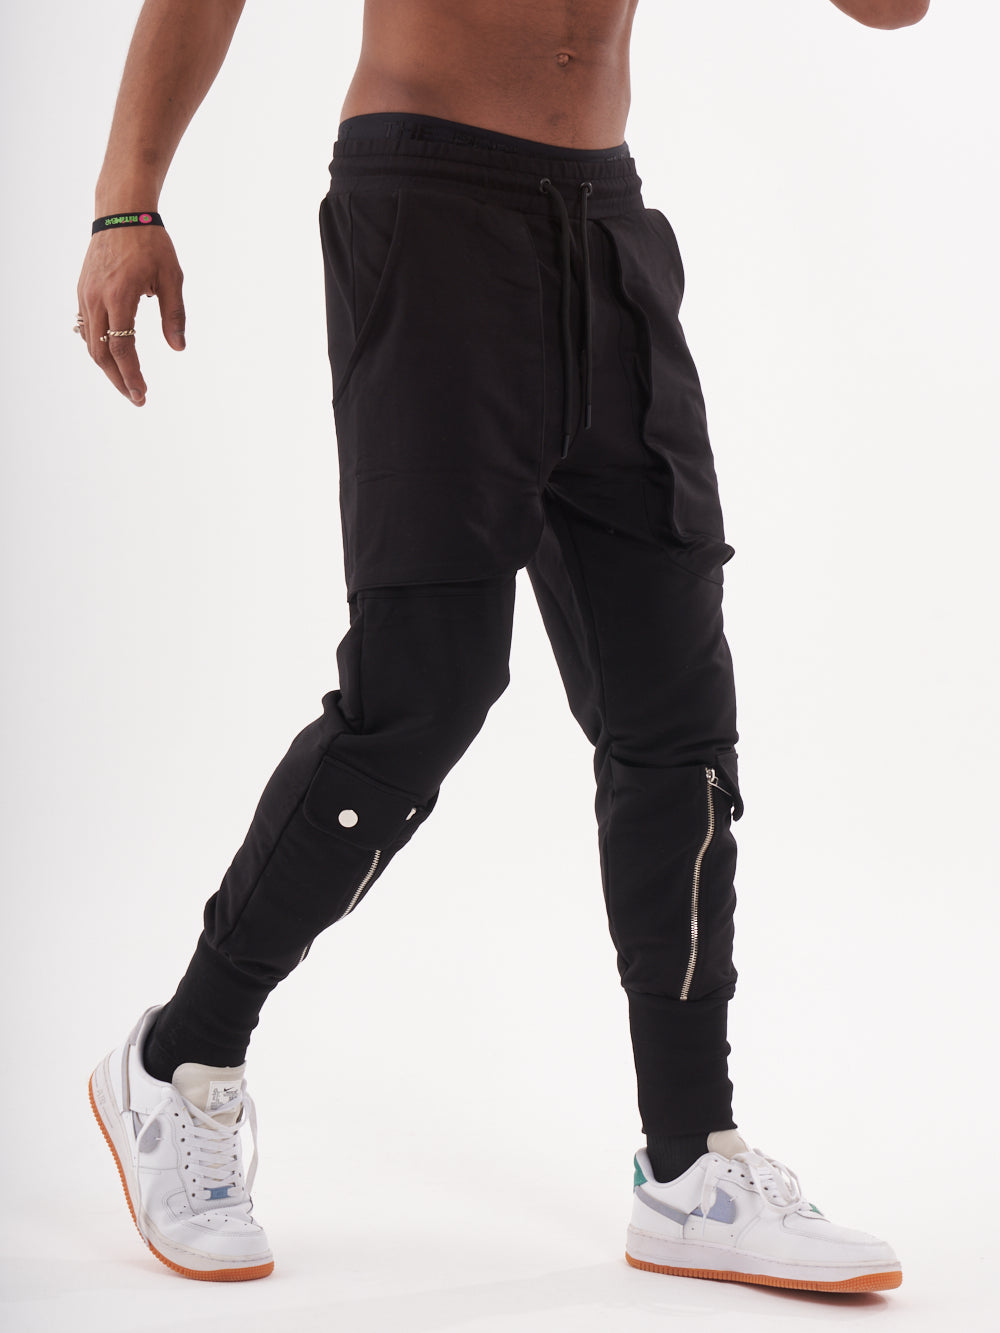 A man wearing GUERRILLA | BLACK joggers and sneakers.